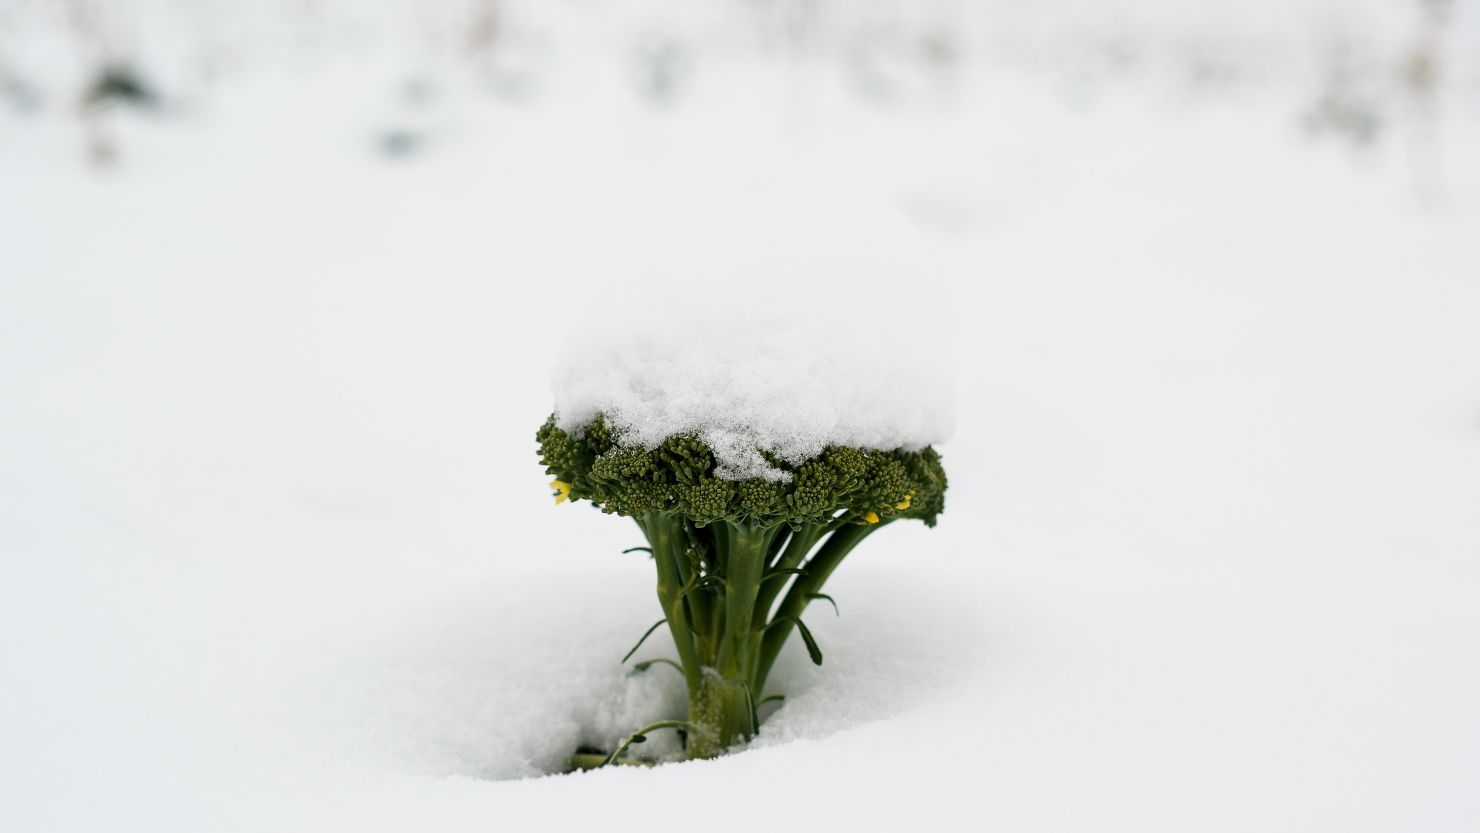 Broccoli is one of several vegetable crops affected by the unusually cold, wet weather in southern Spain.